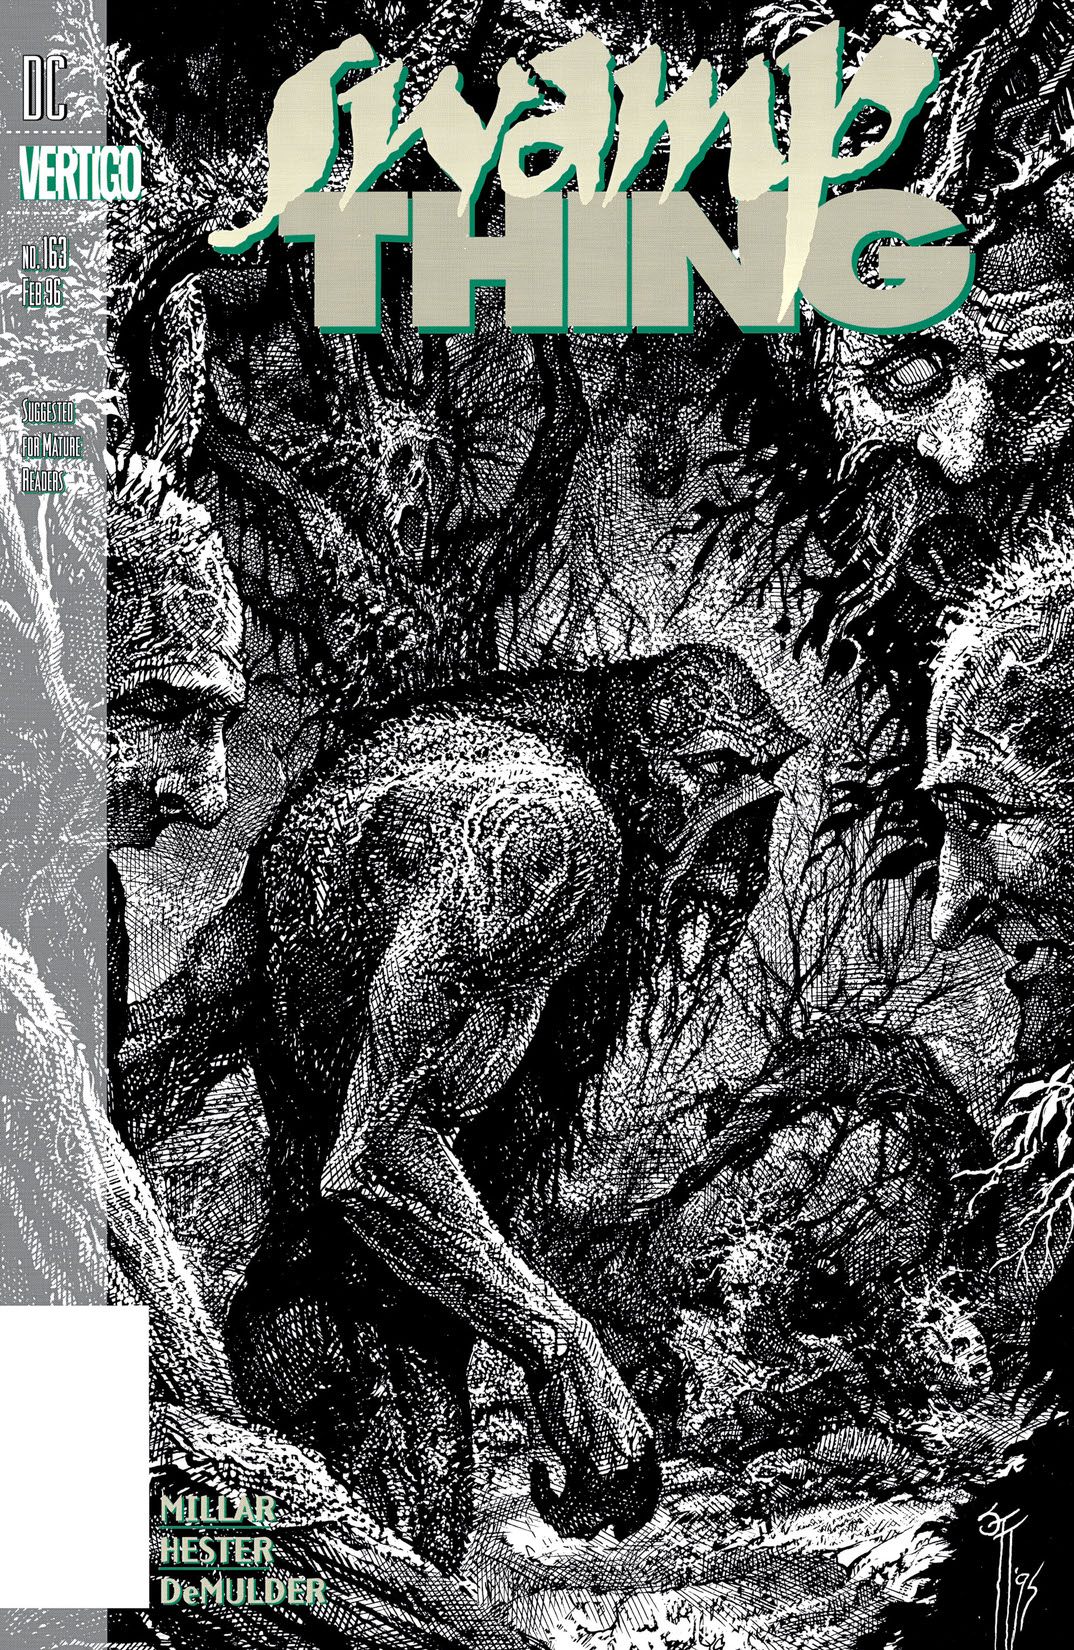 Swamp Thing (1985-) #163 preview images